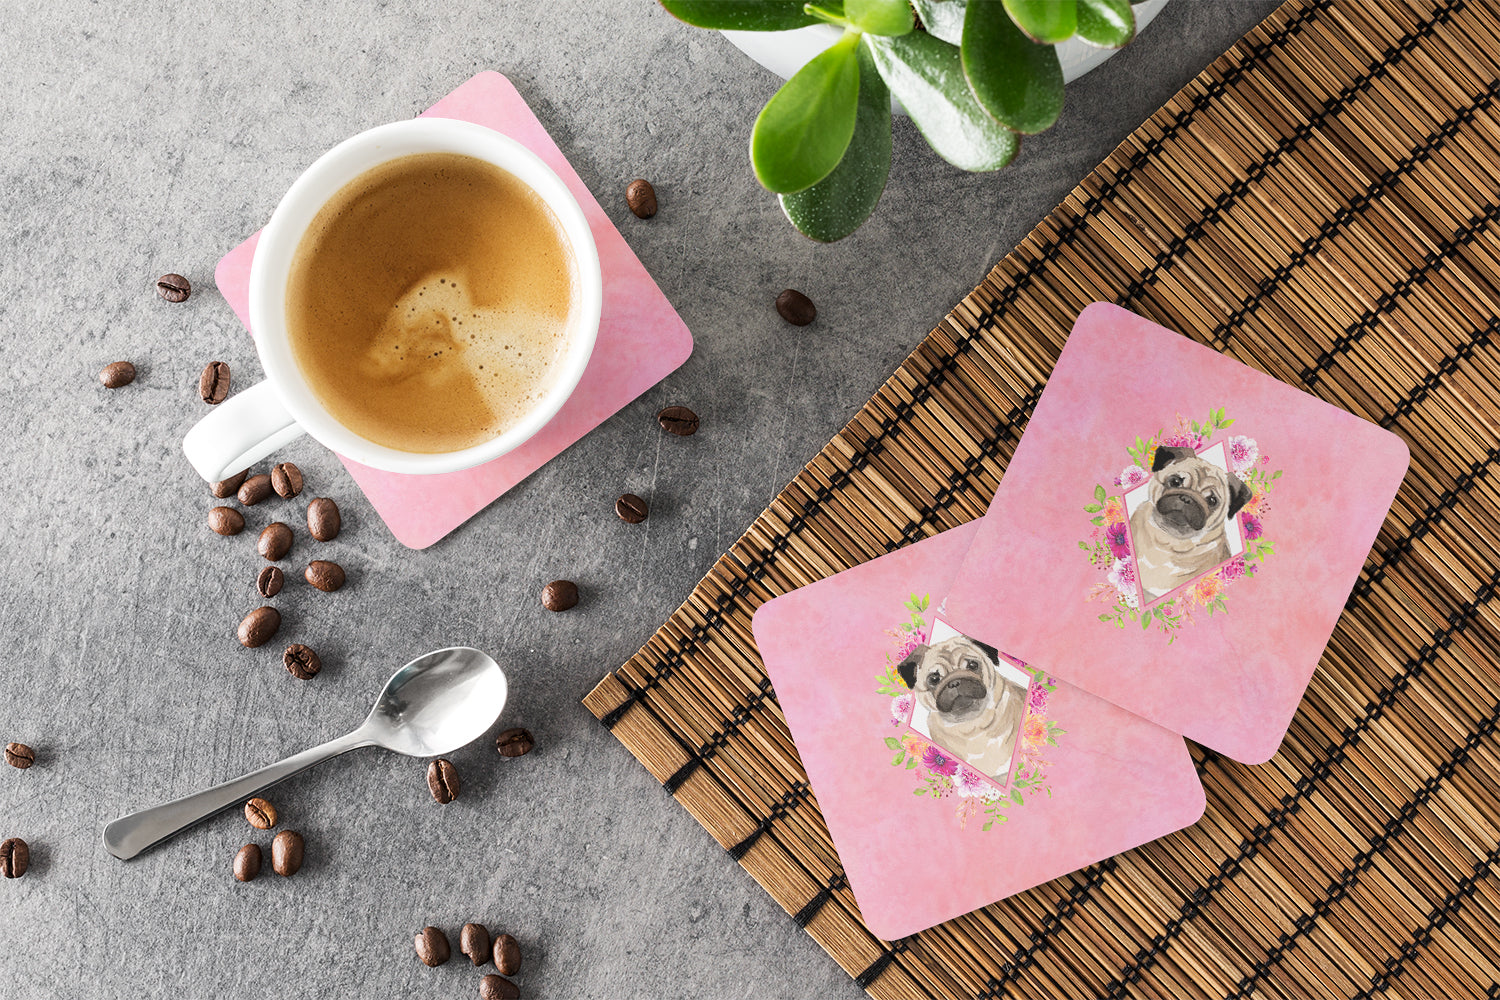 Set of 4 Fawn Pug Pink Flowers Foam Coasters Set of 4 CK4218FC - the-store.com